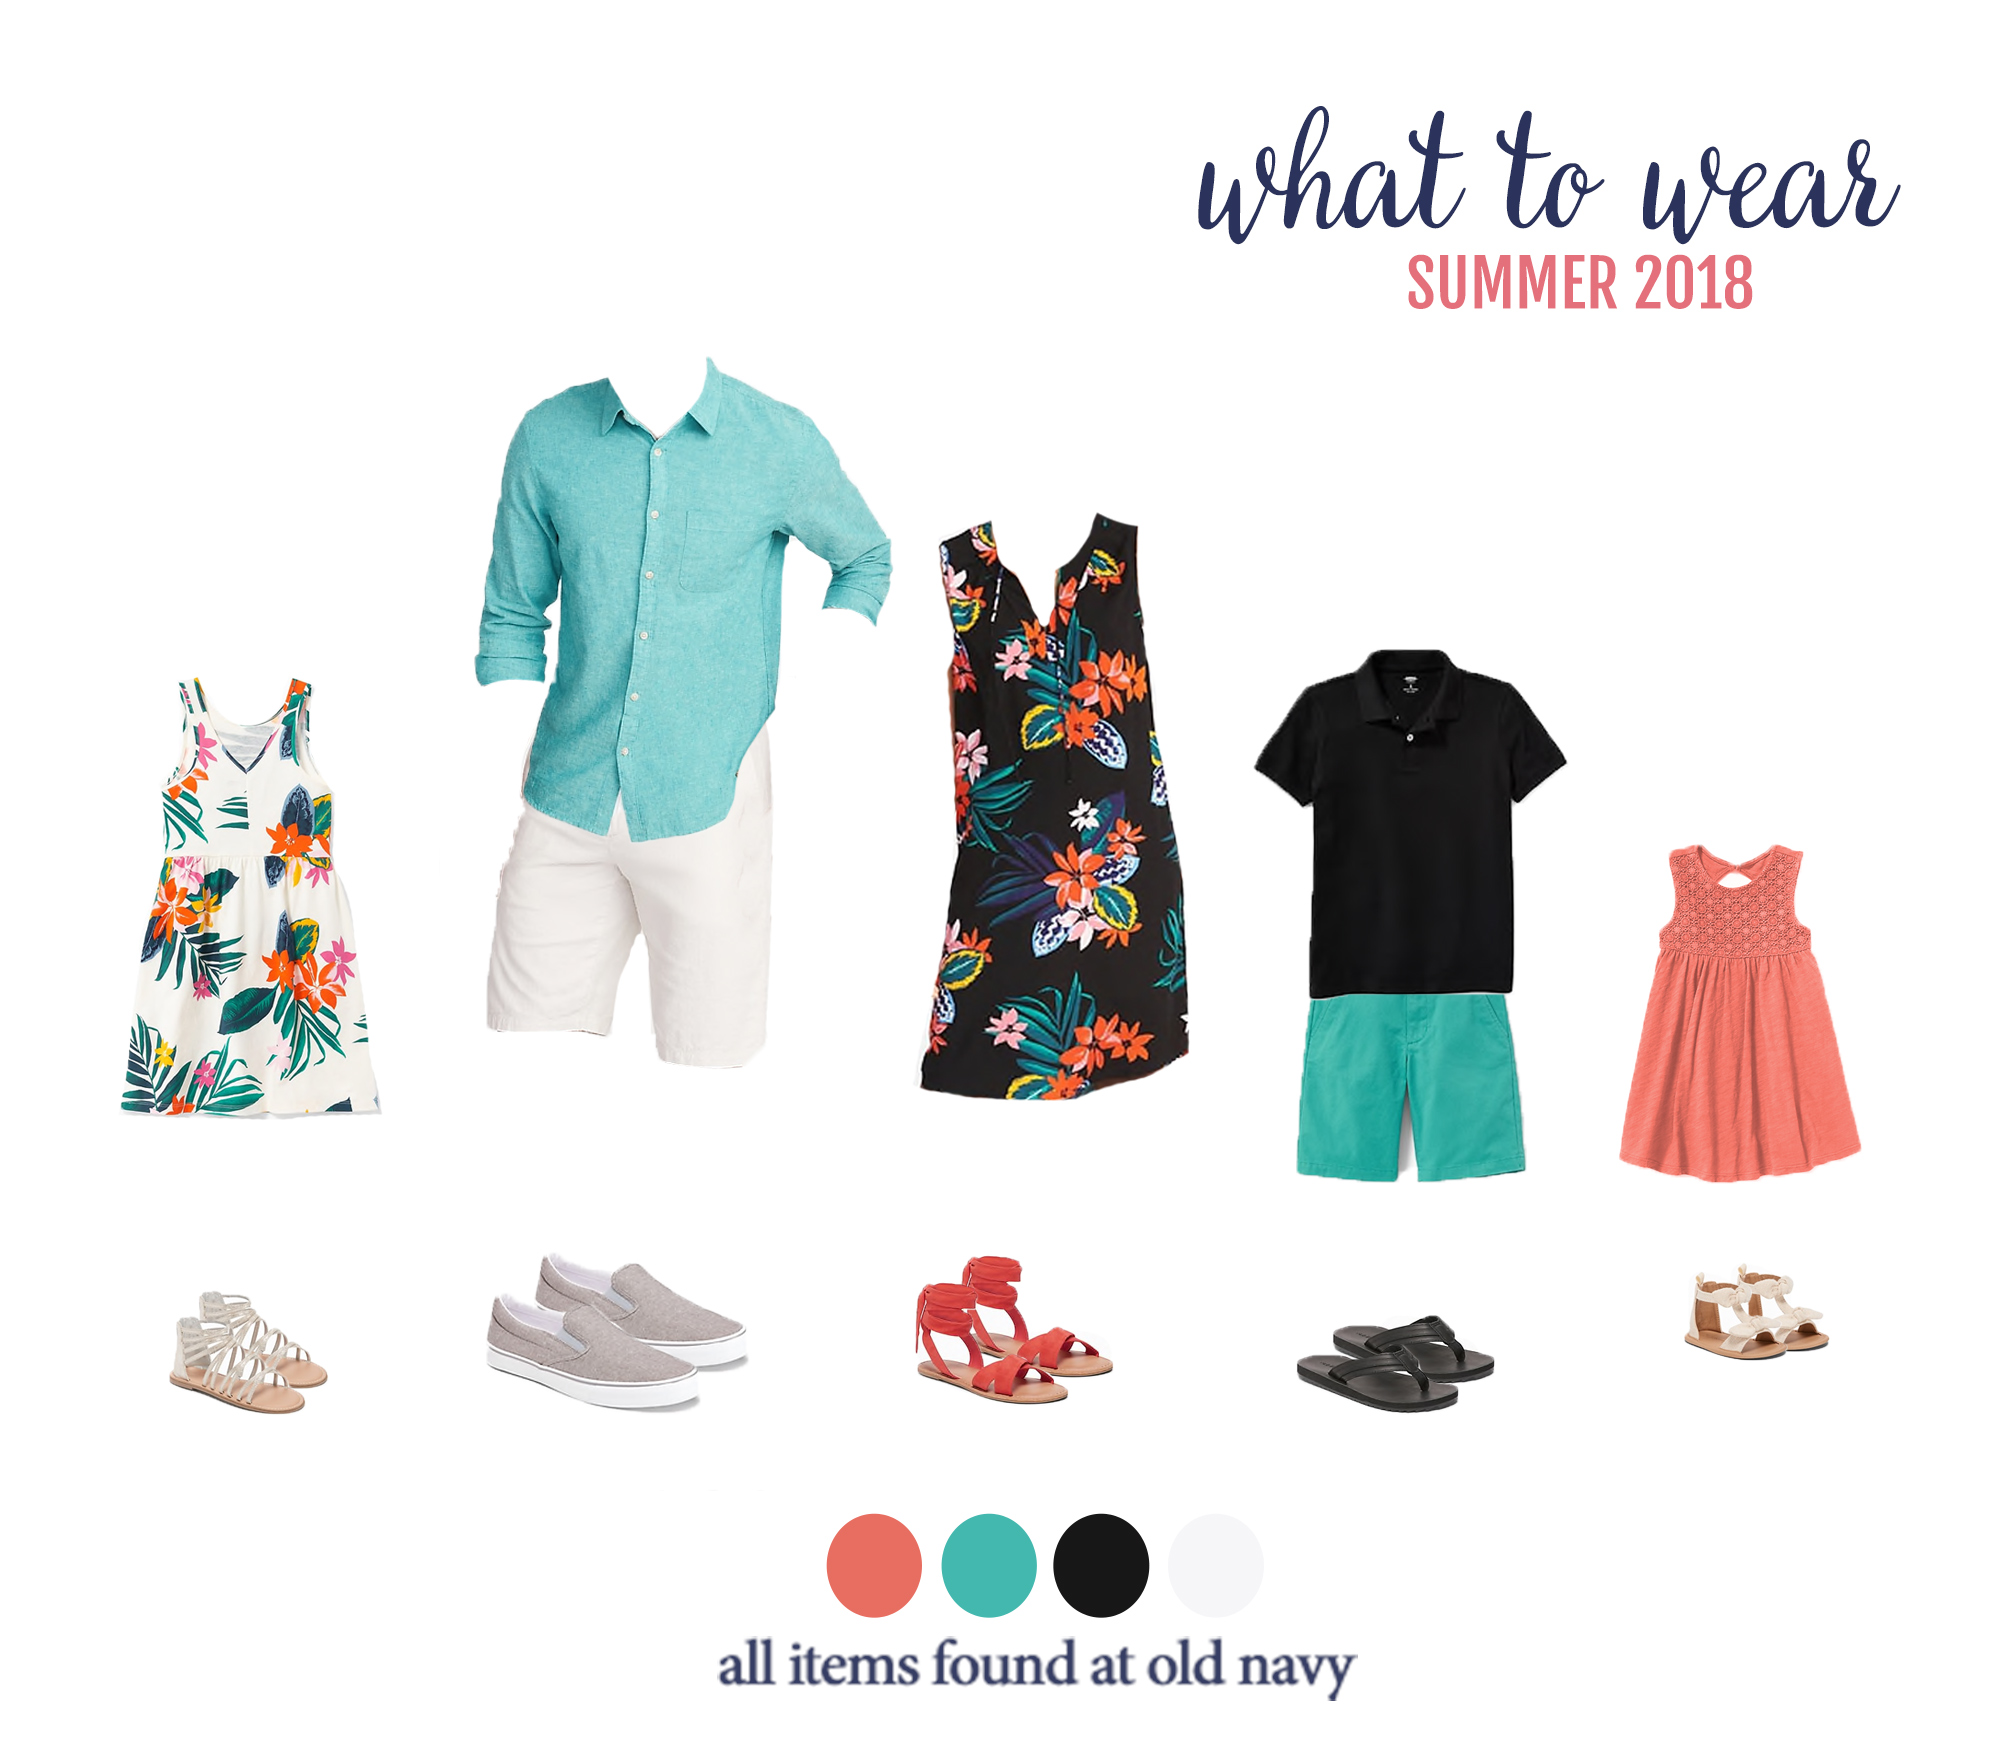 What to wear for summer family photos... check out these cute and affordable looks for the entire family! Perfect for summer photos with Miss Freddy.